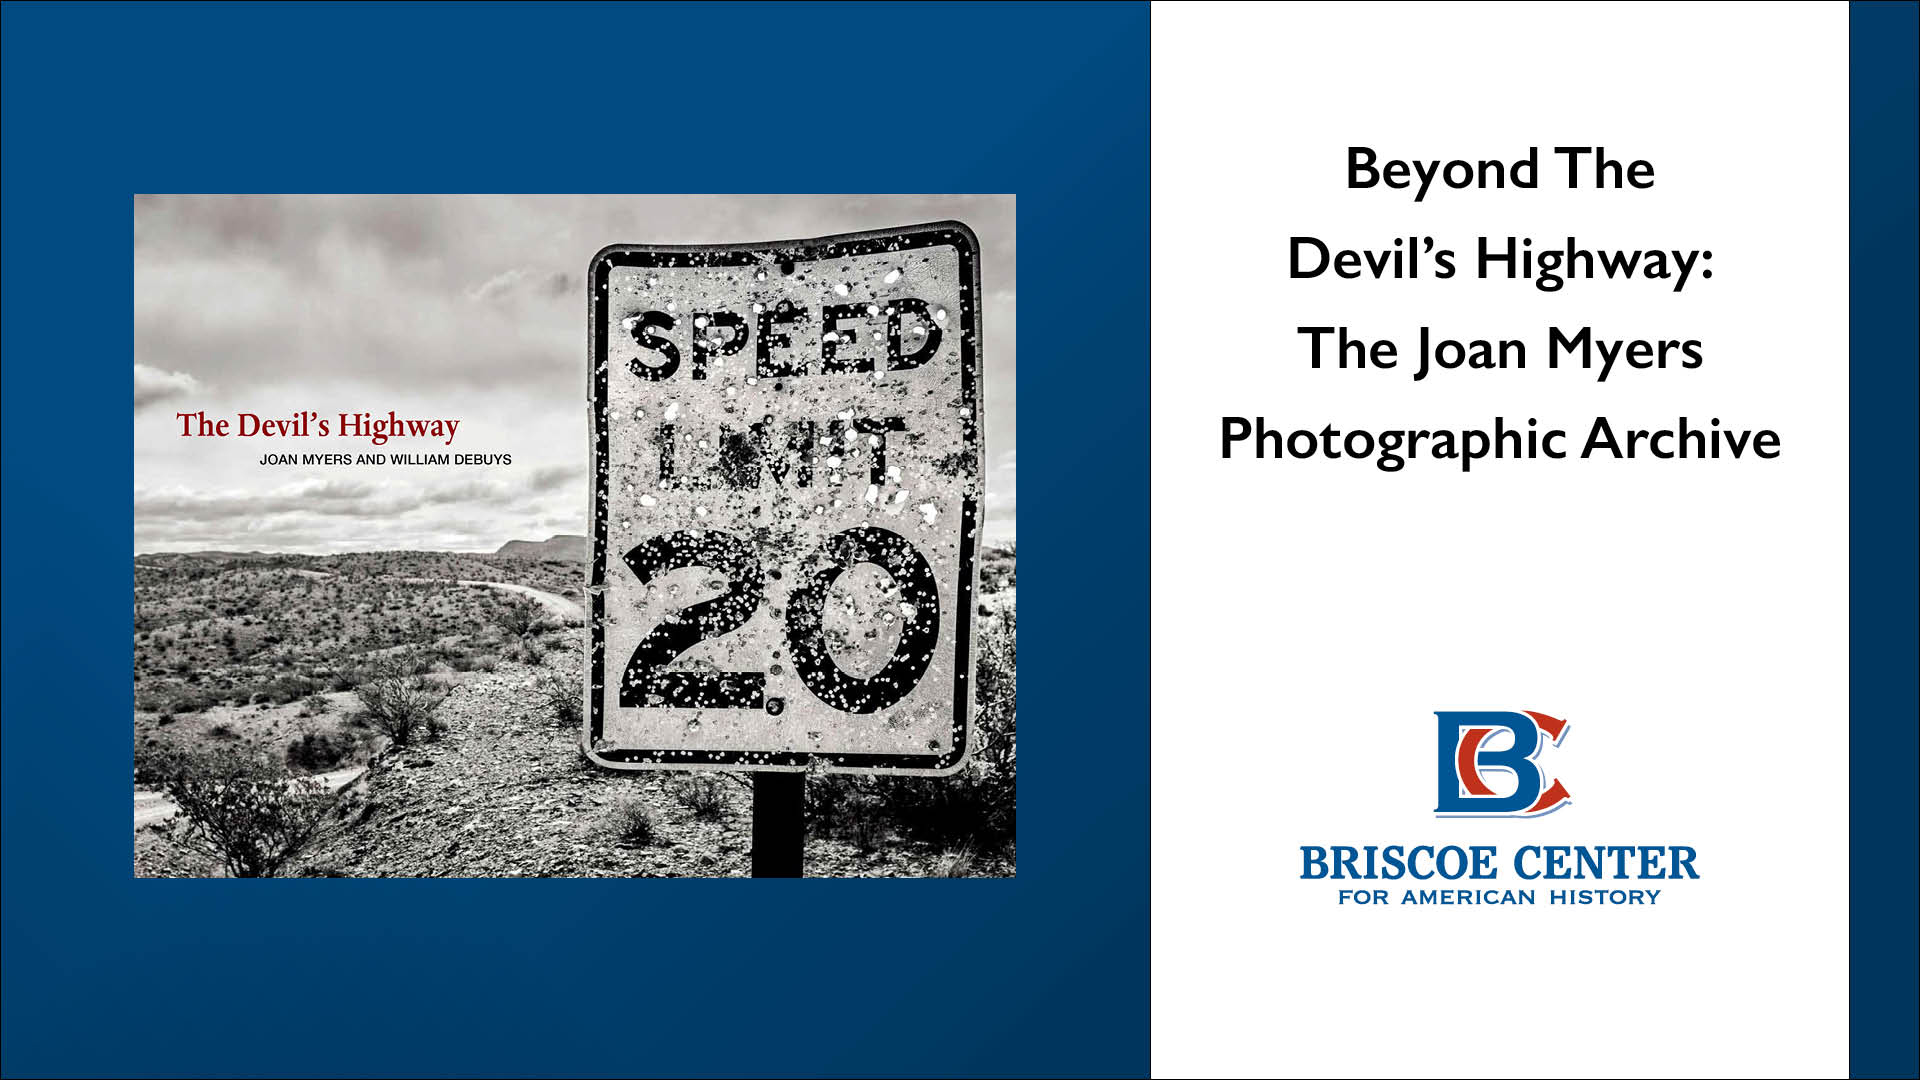 Beyond The Devil’s Highway: The Joan Myers Photographic Archive